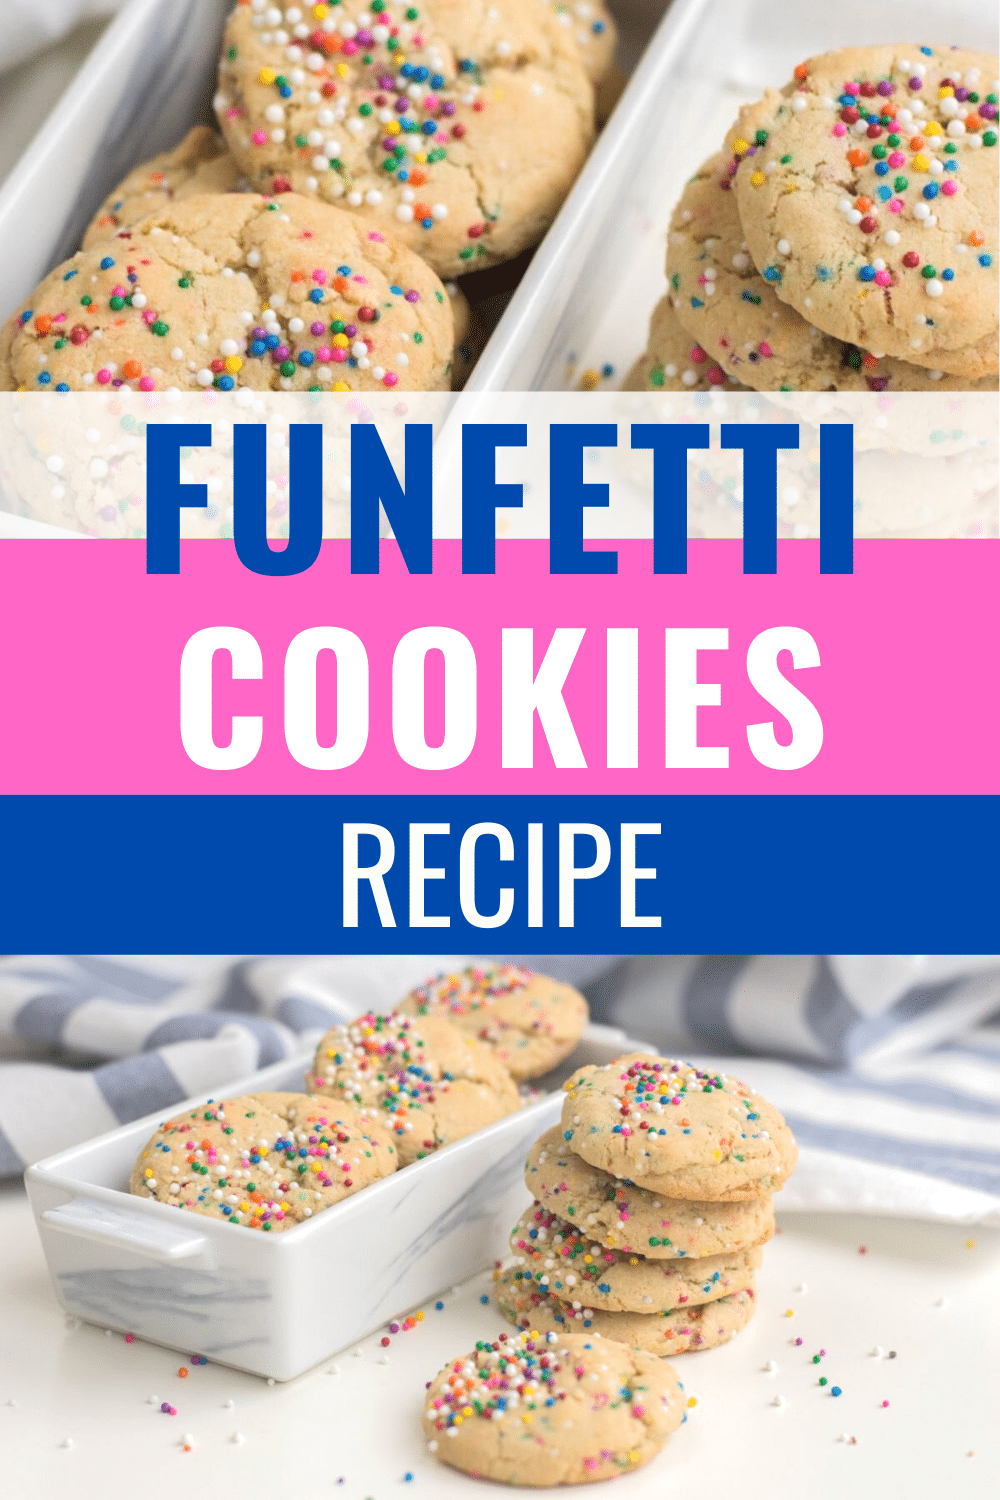 A collage of 2 images of Funfetti cookies with a large text in the center, with a layer of white, blue and pink text box, saying "Funfetti Cookies Recipe"